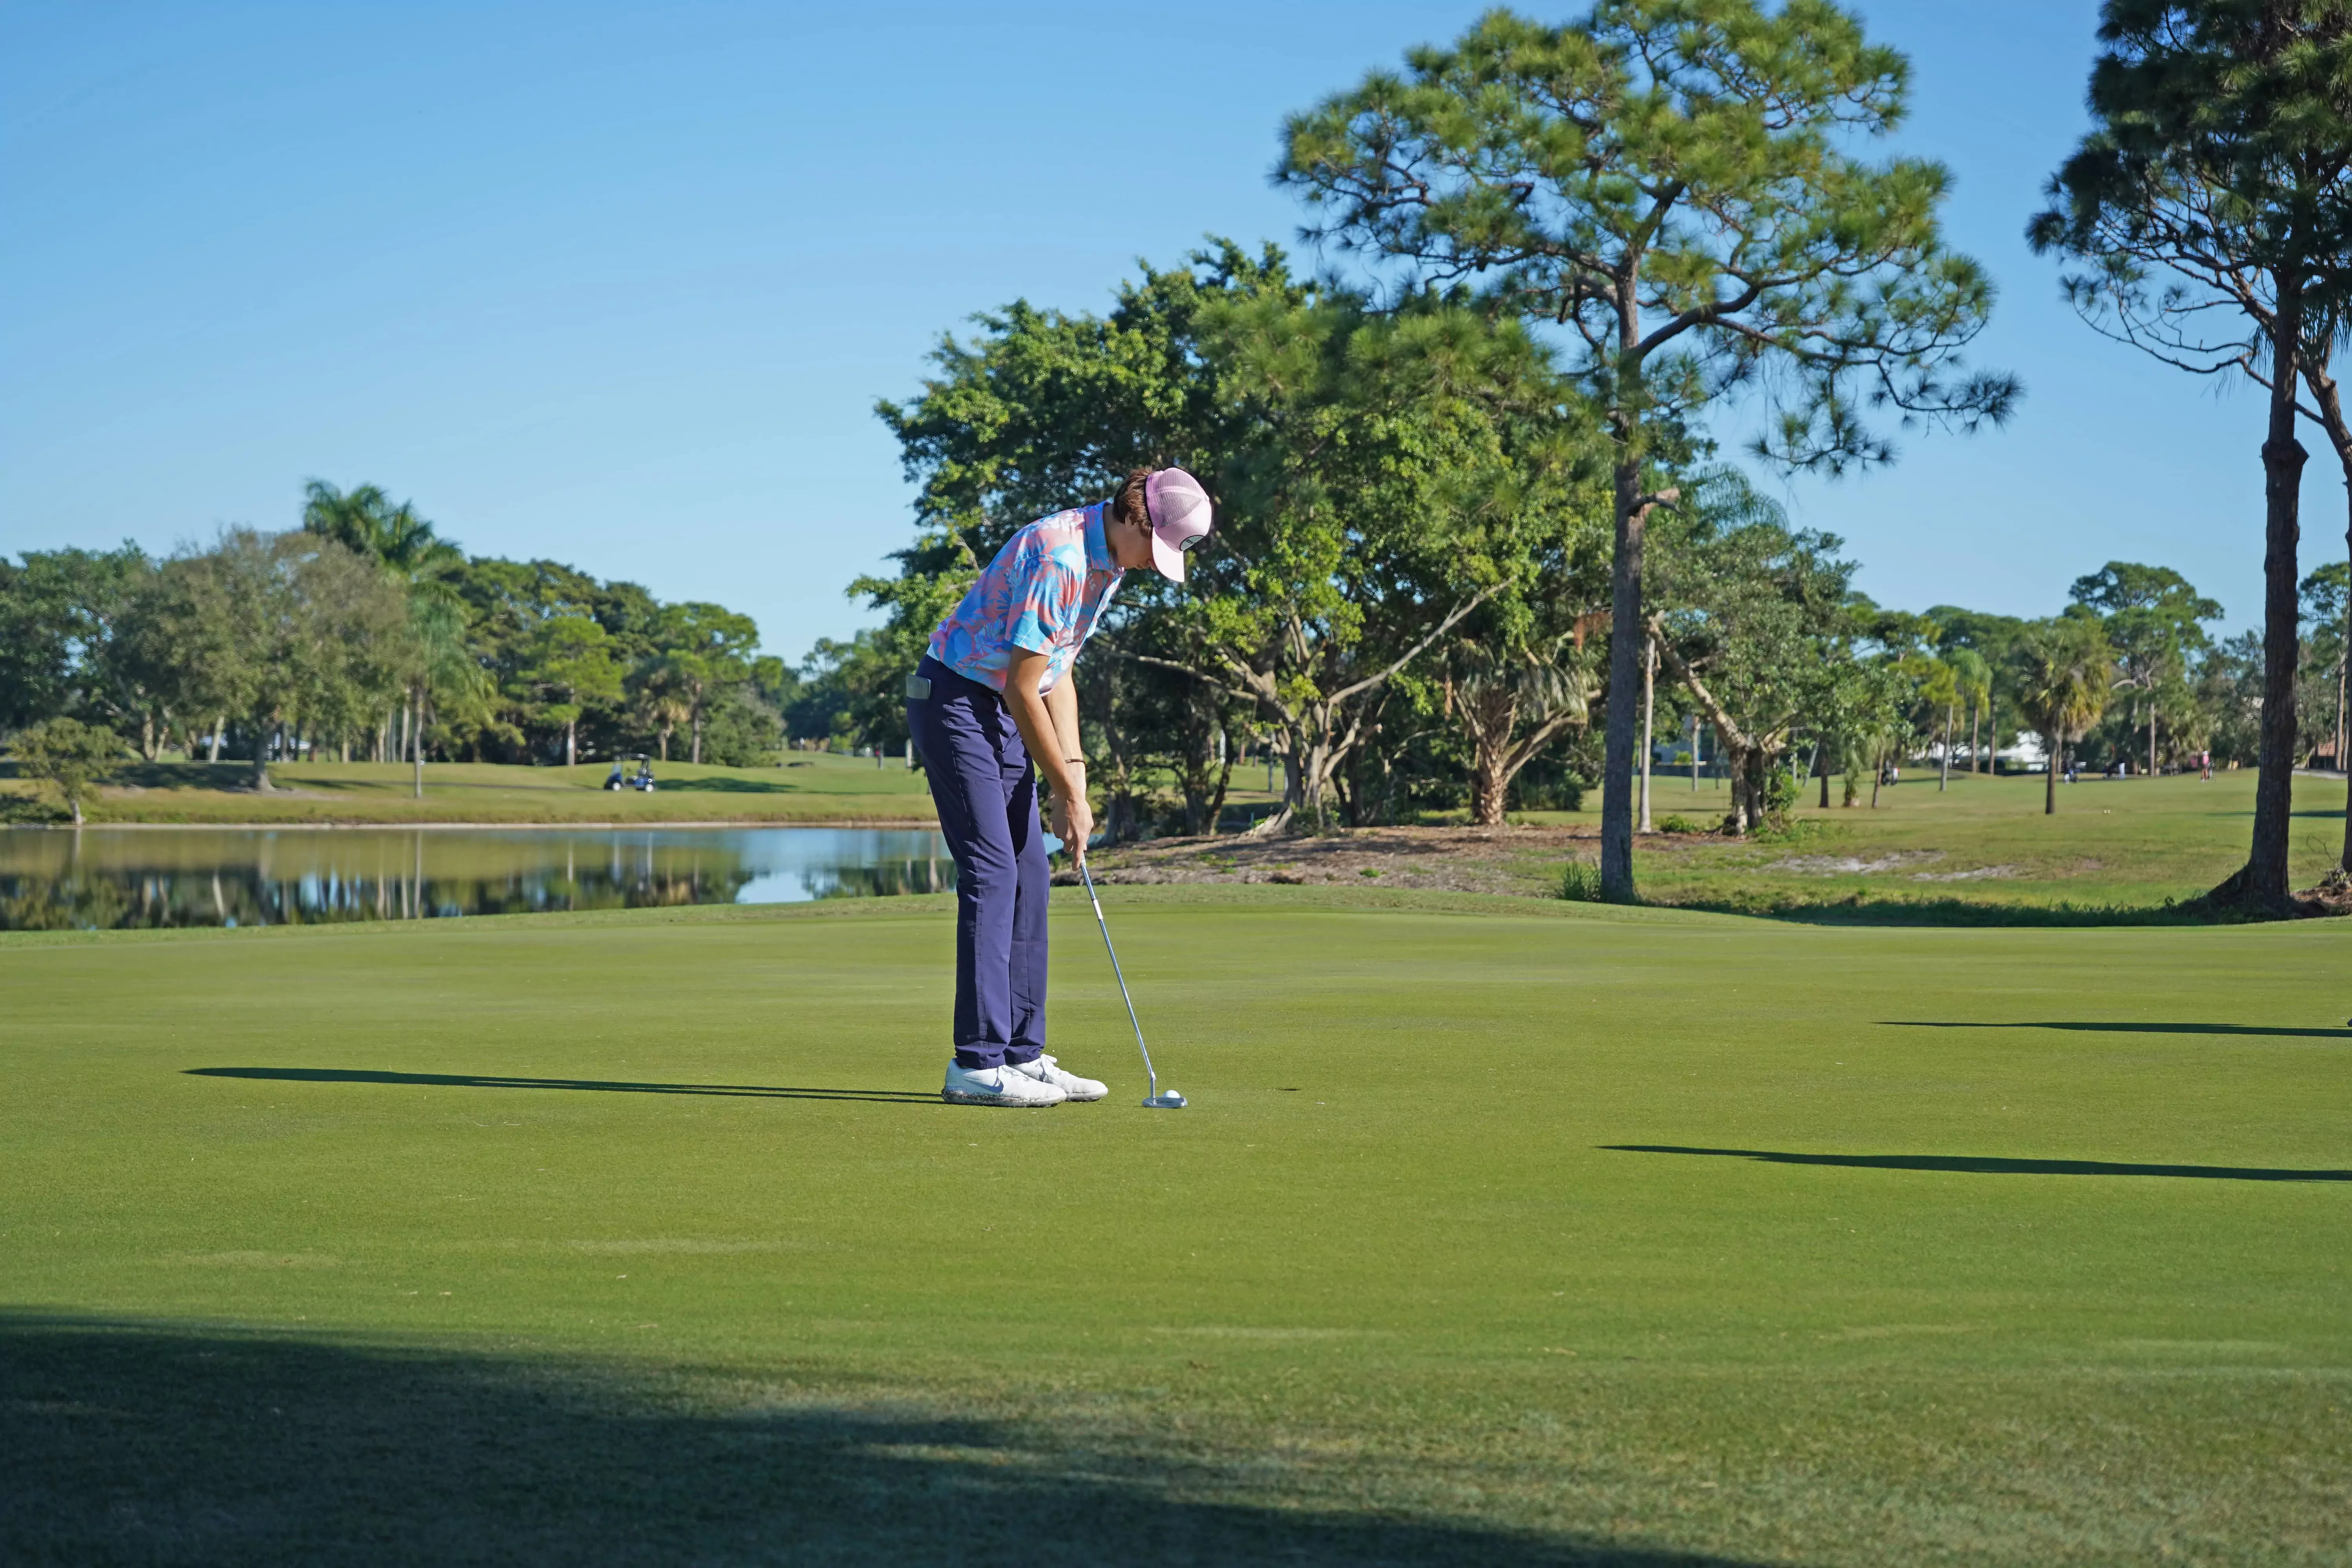 Image of a golfer on the ninth hole of the Sailfish 18 Course at Sailfish Sands